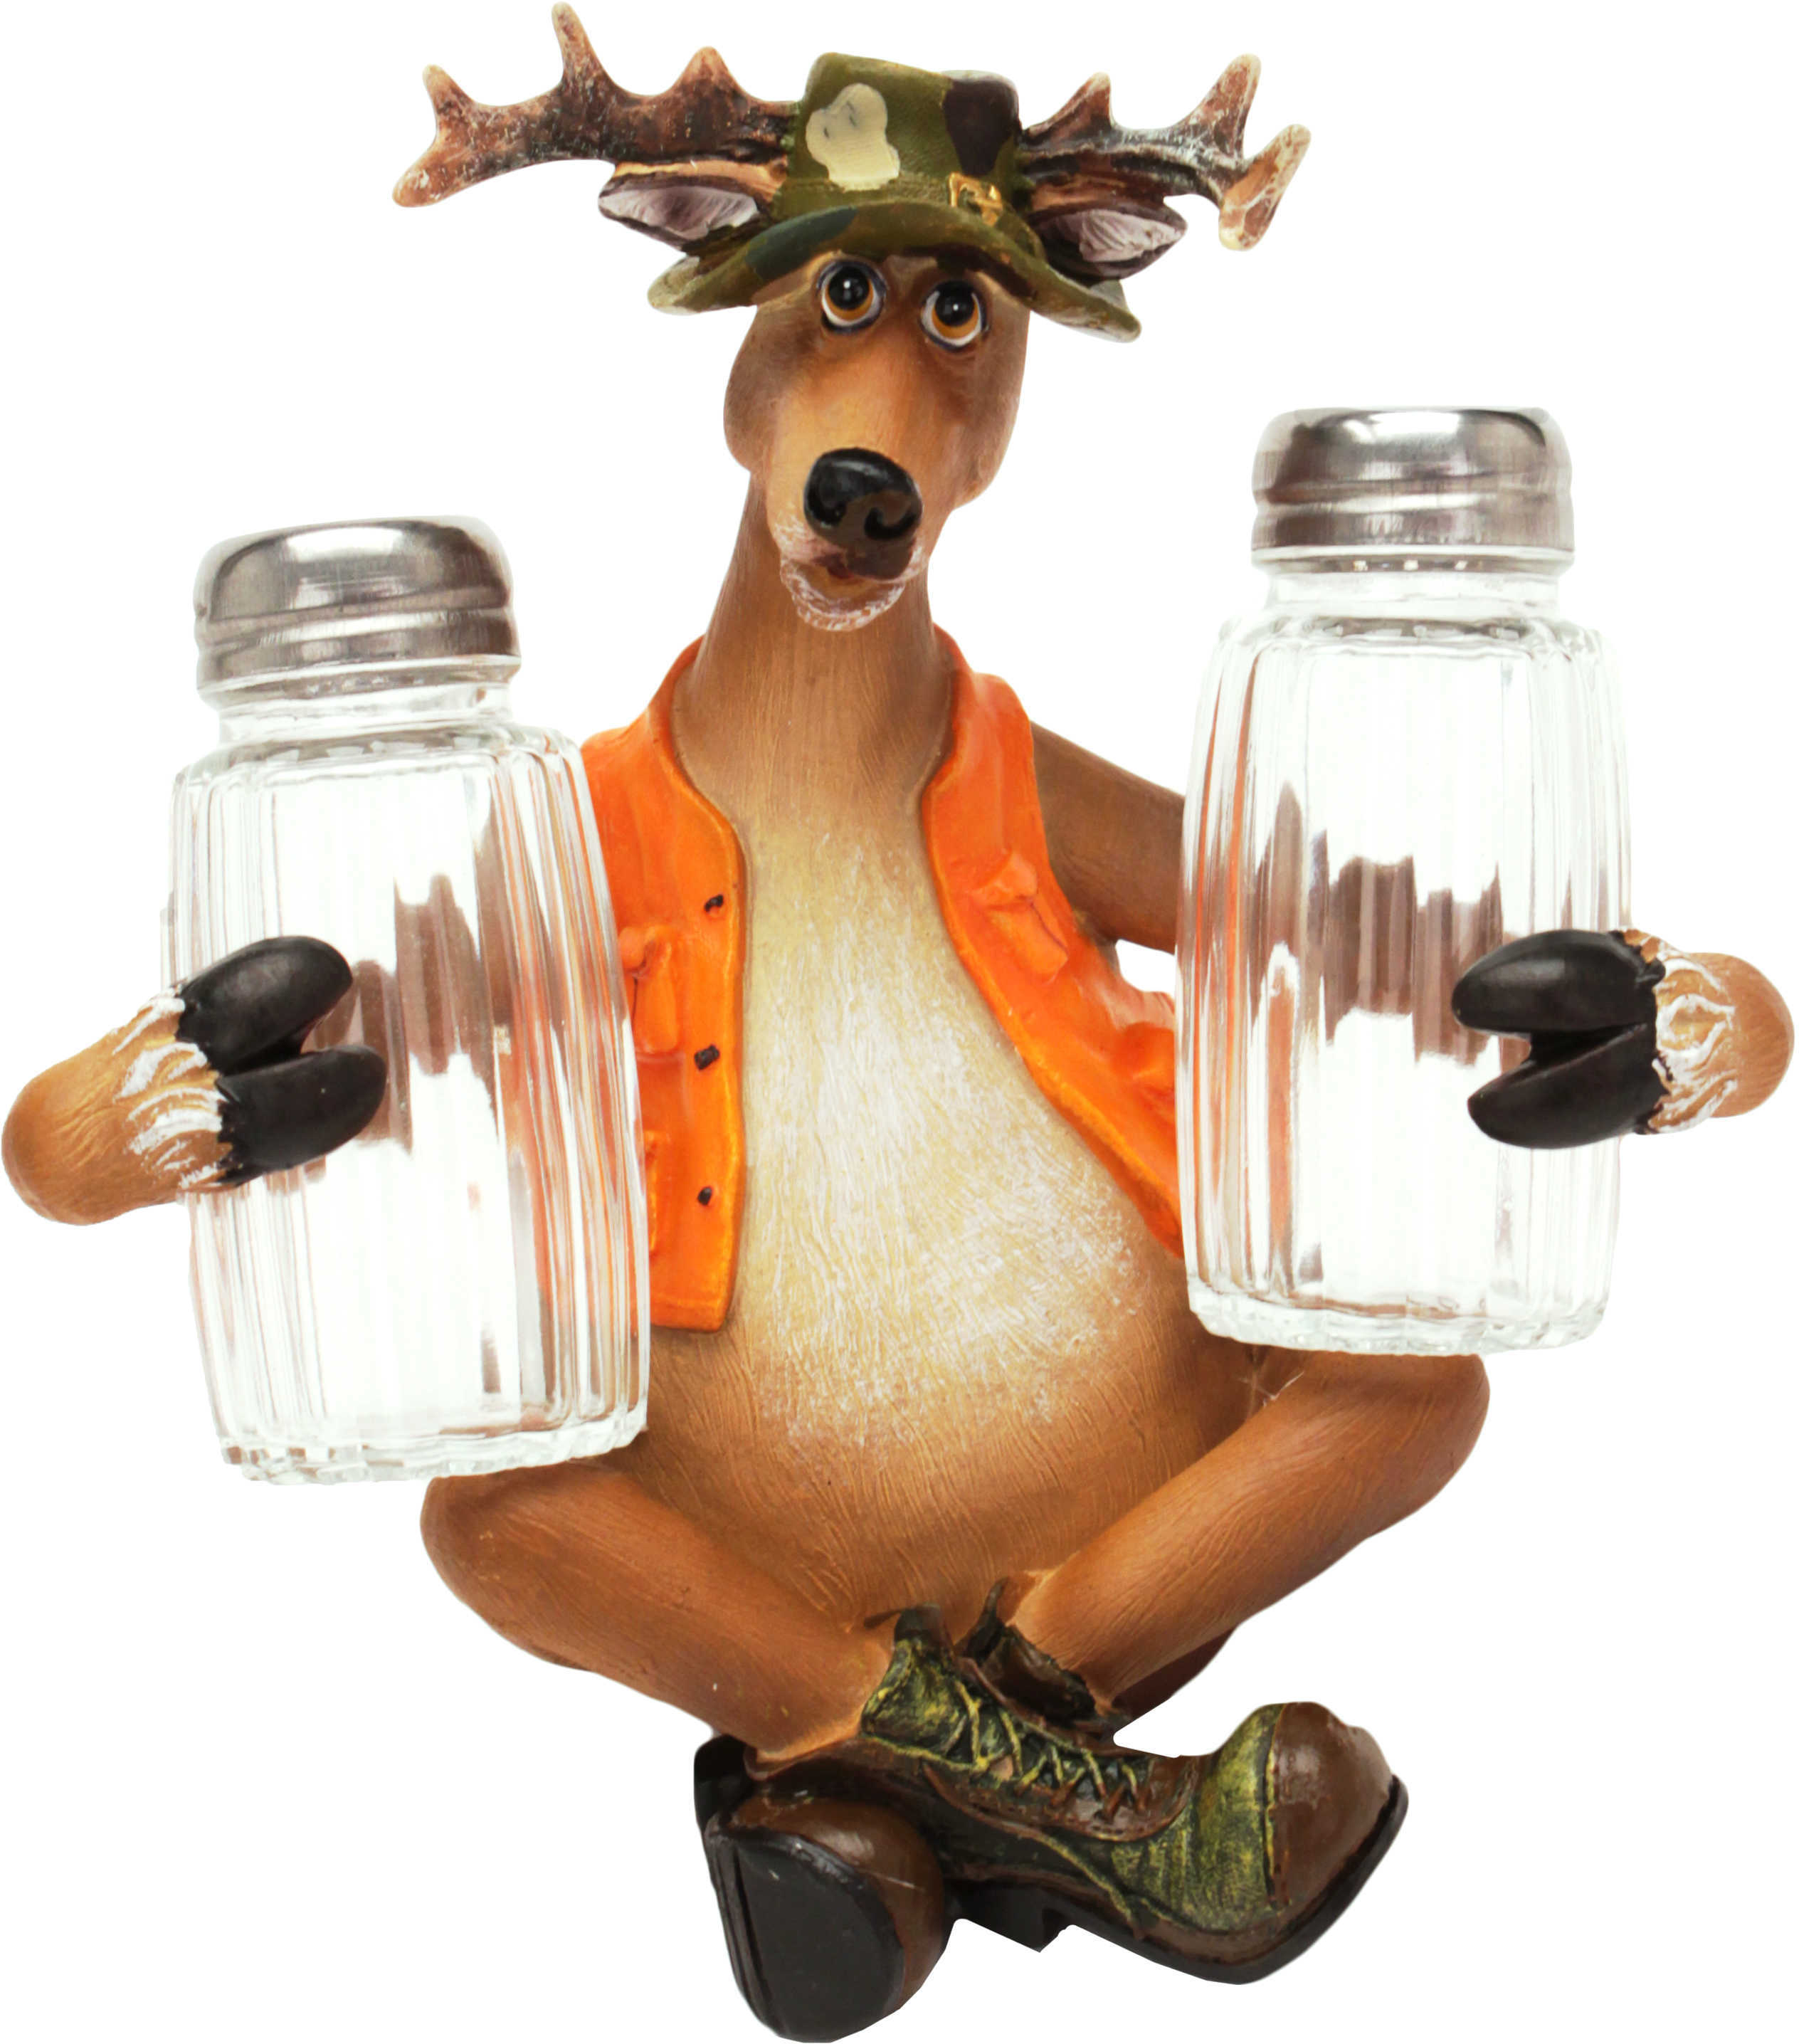 Rivers Edge Products Deer Holding Salt & Pepper SHAKERS